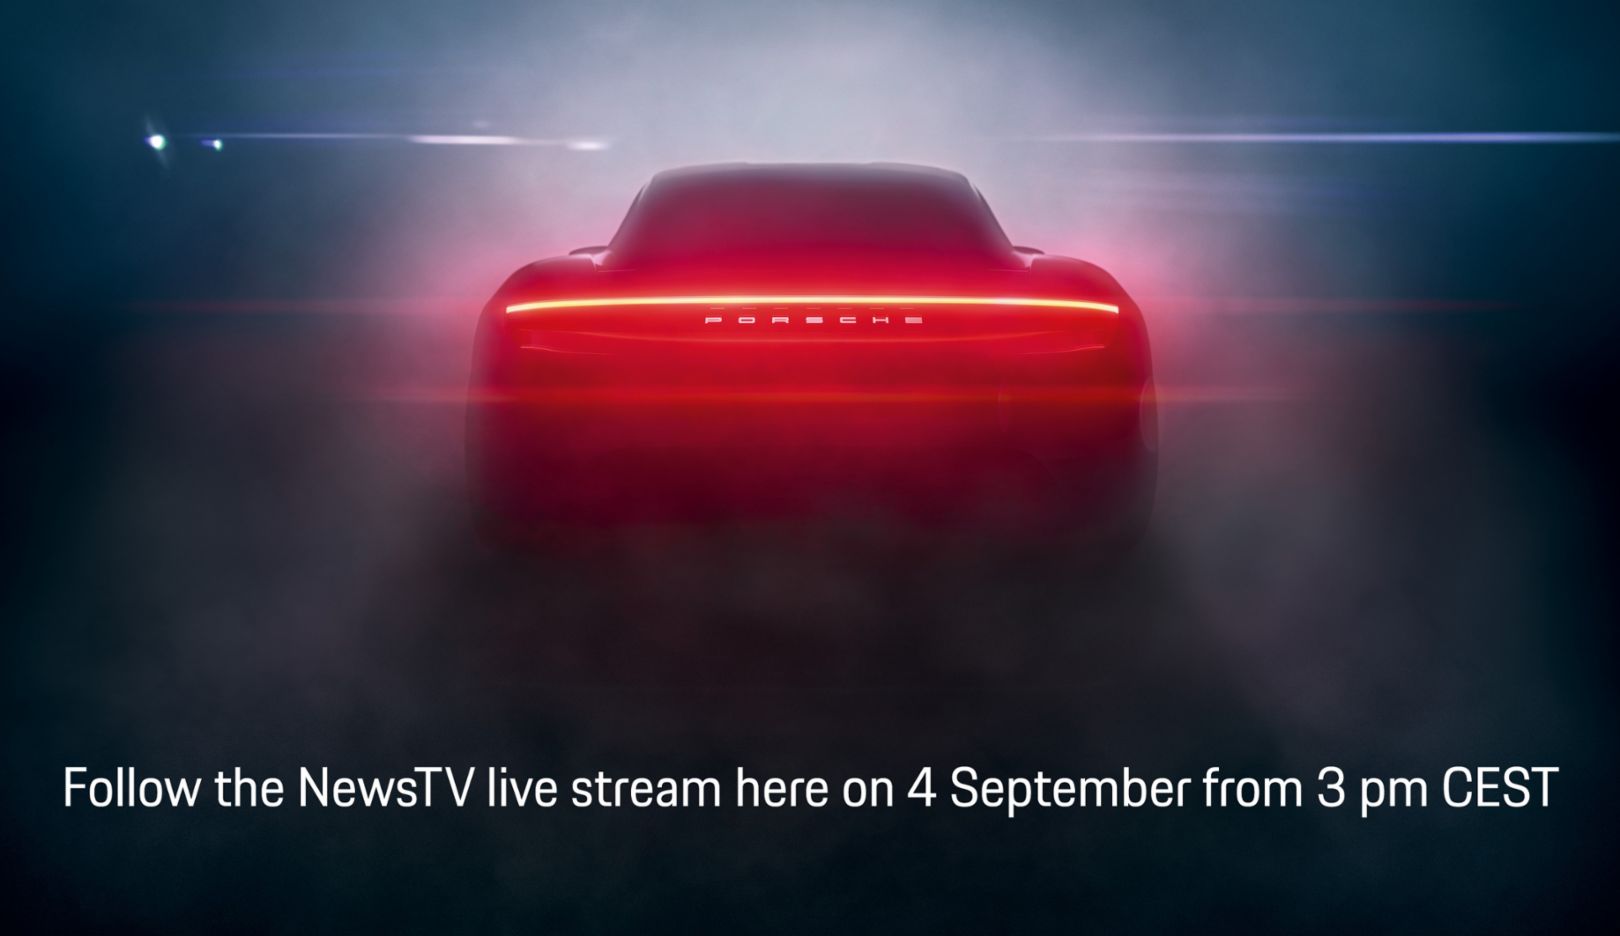 Live broadcasting of the world premiere of the brand new Porsche Taycan 